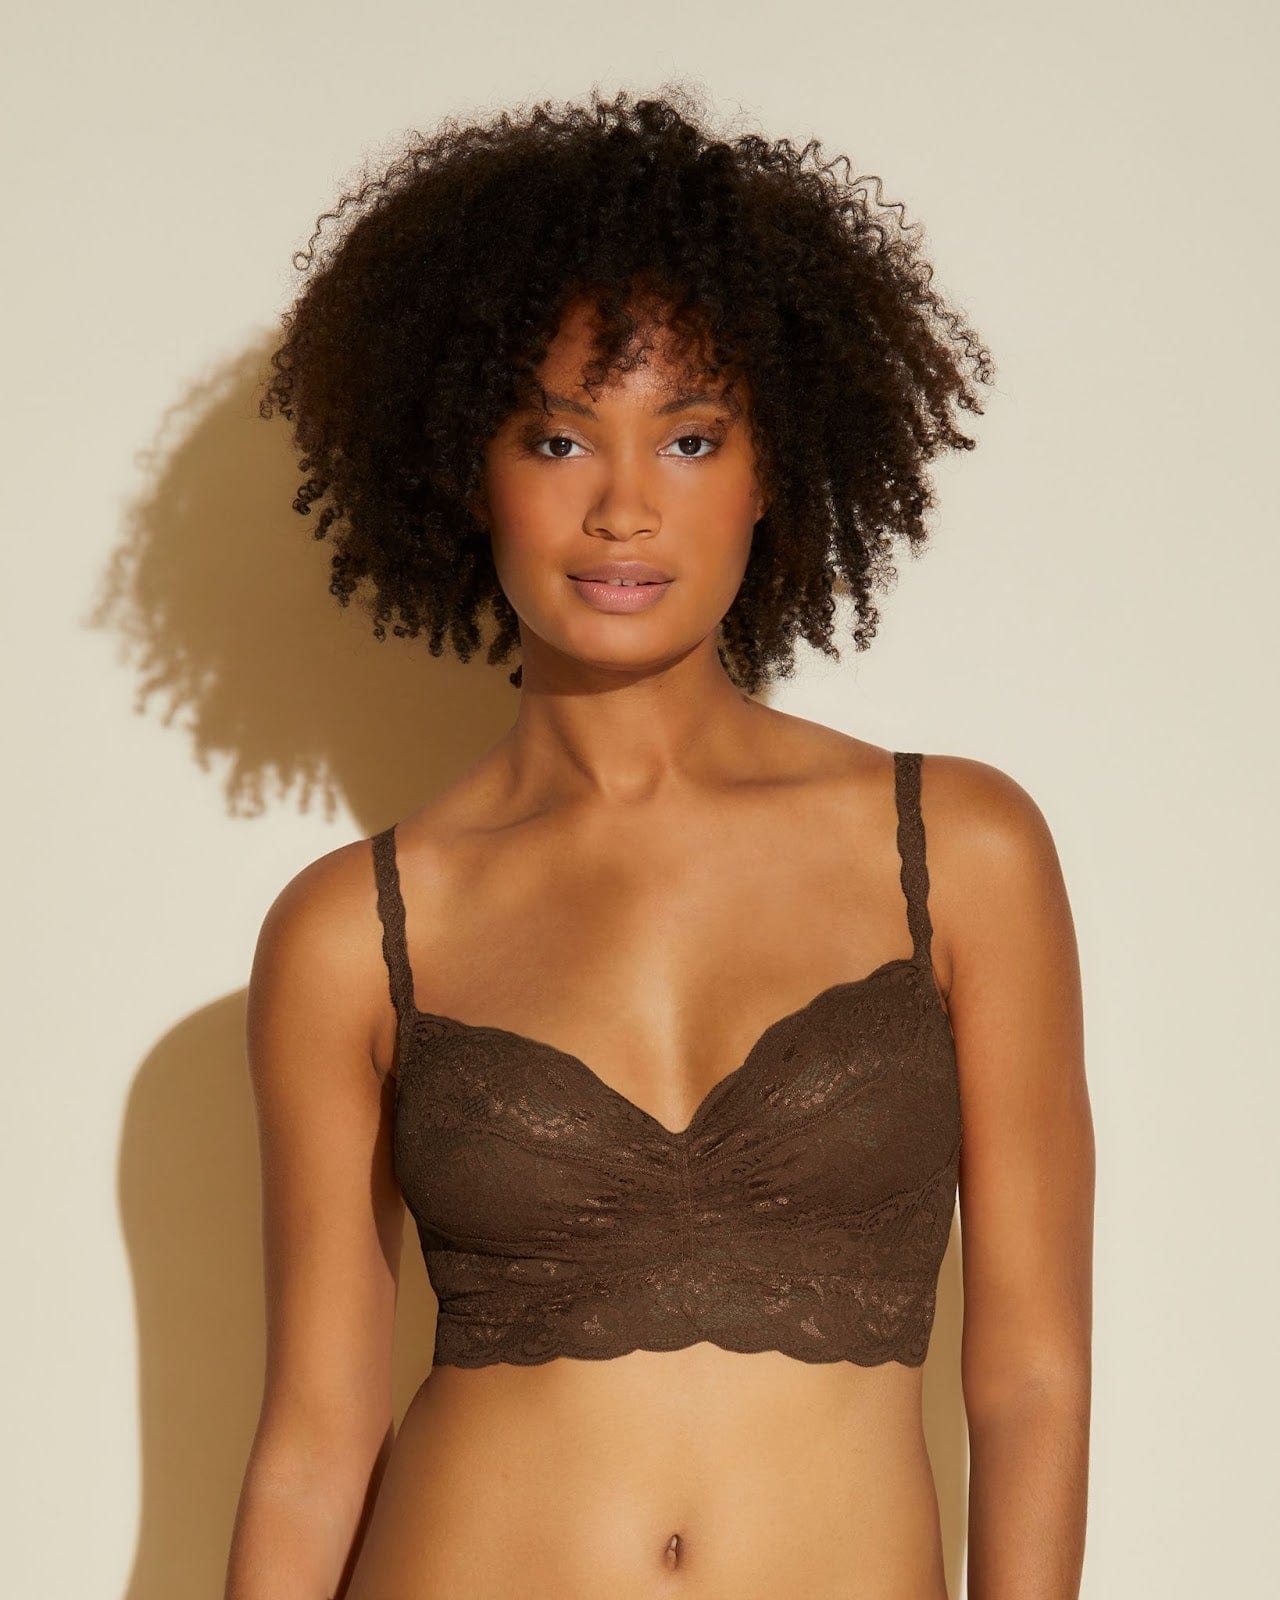 NEW - Cosabella Never Say Never Sweetie Bralette in Black - S, M